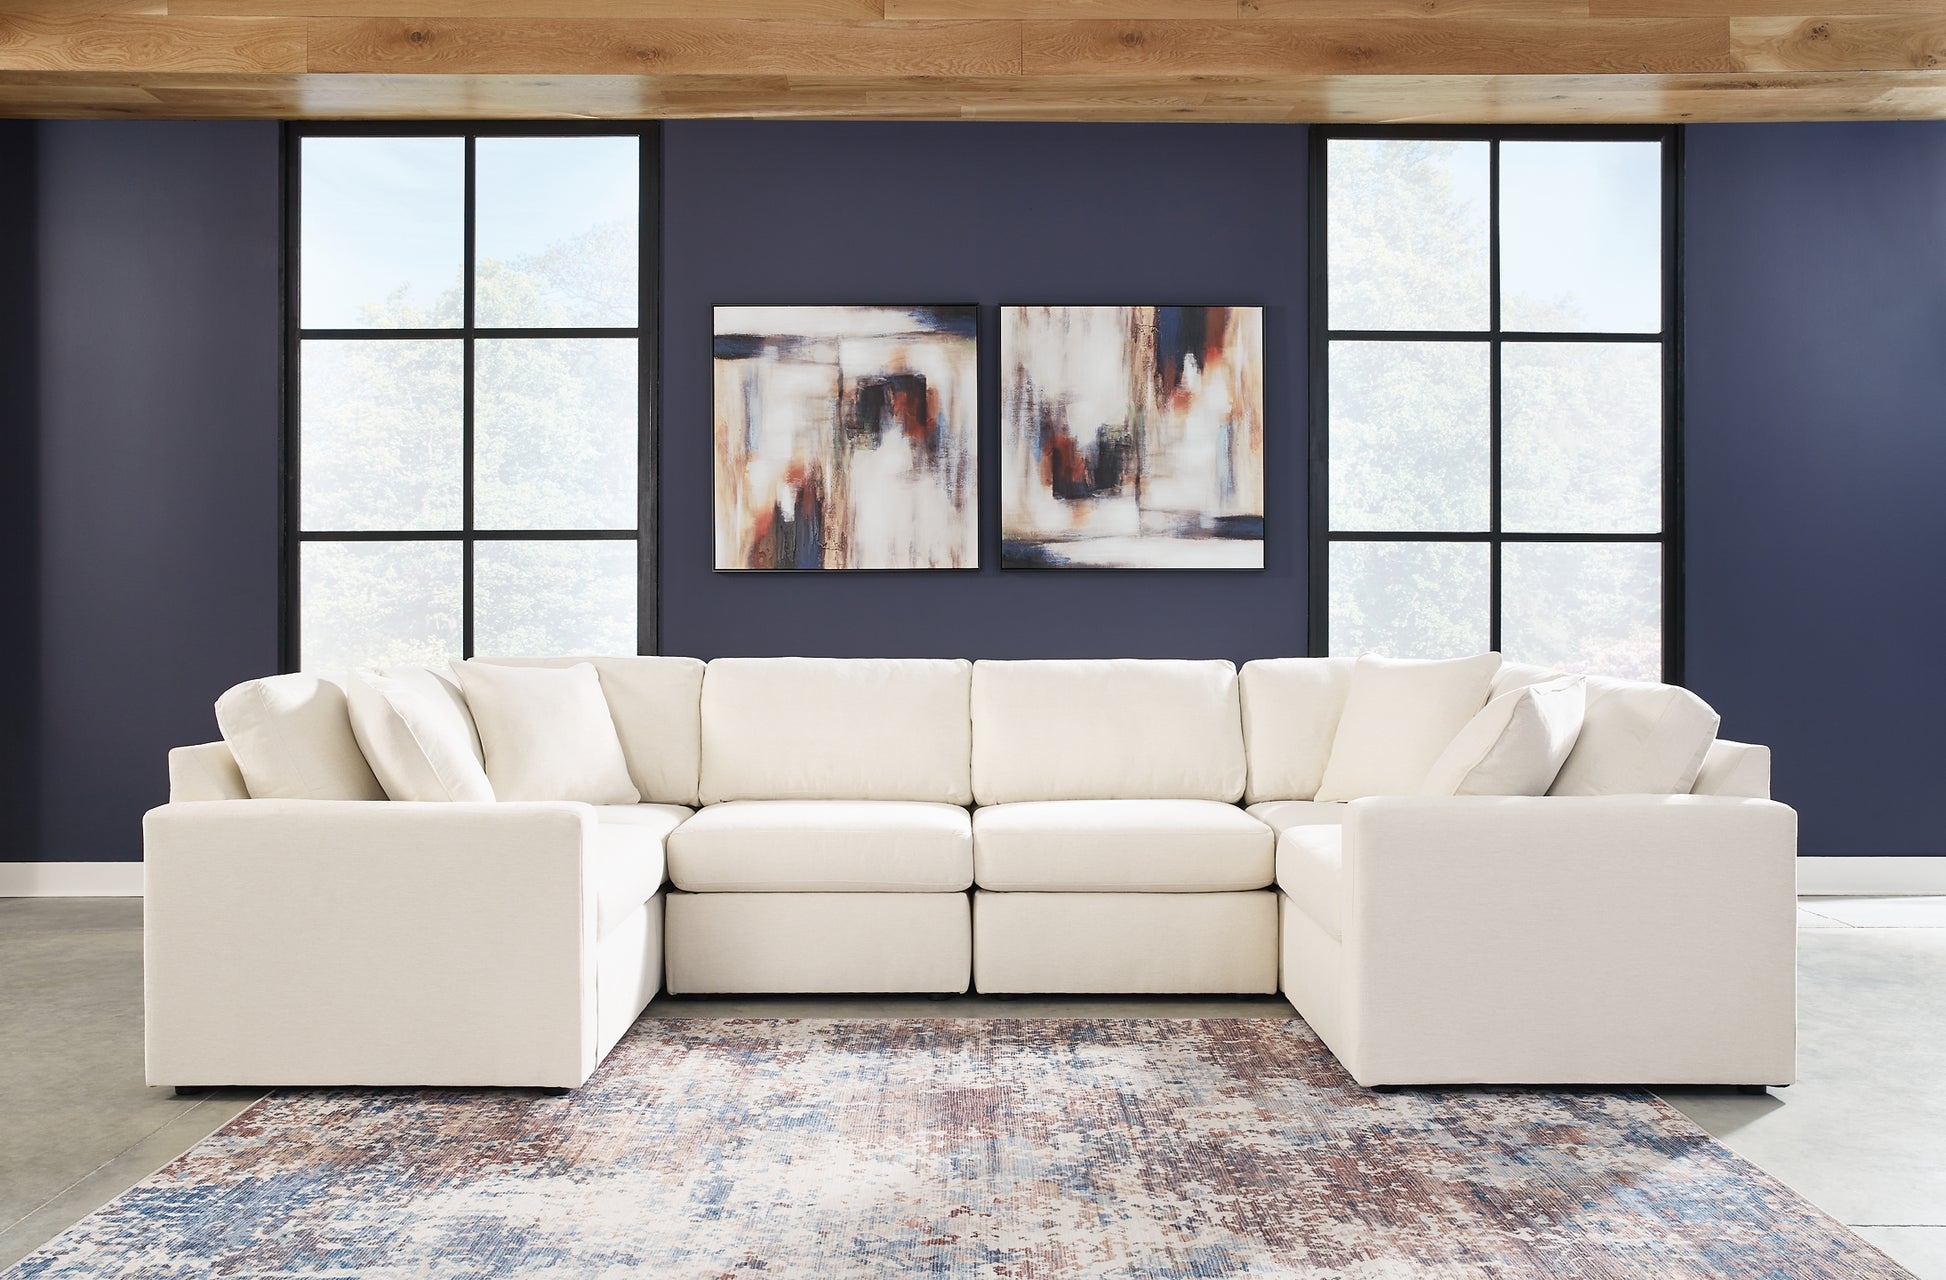 Modmax 6-Piece Sectional with Ottoman Signature Design by Ashley®